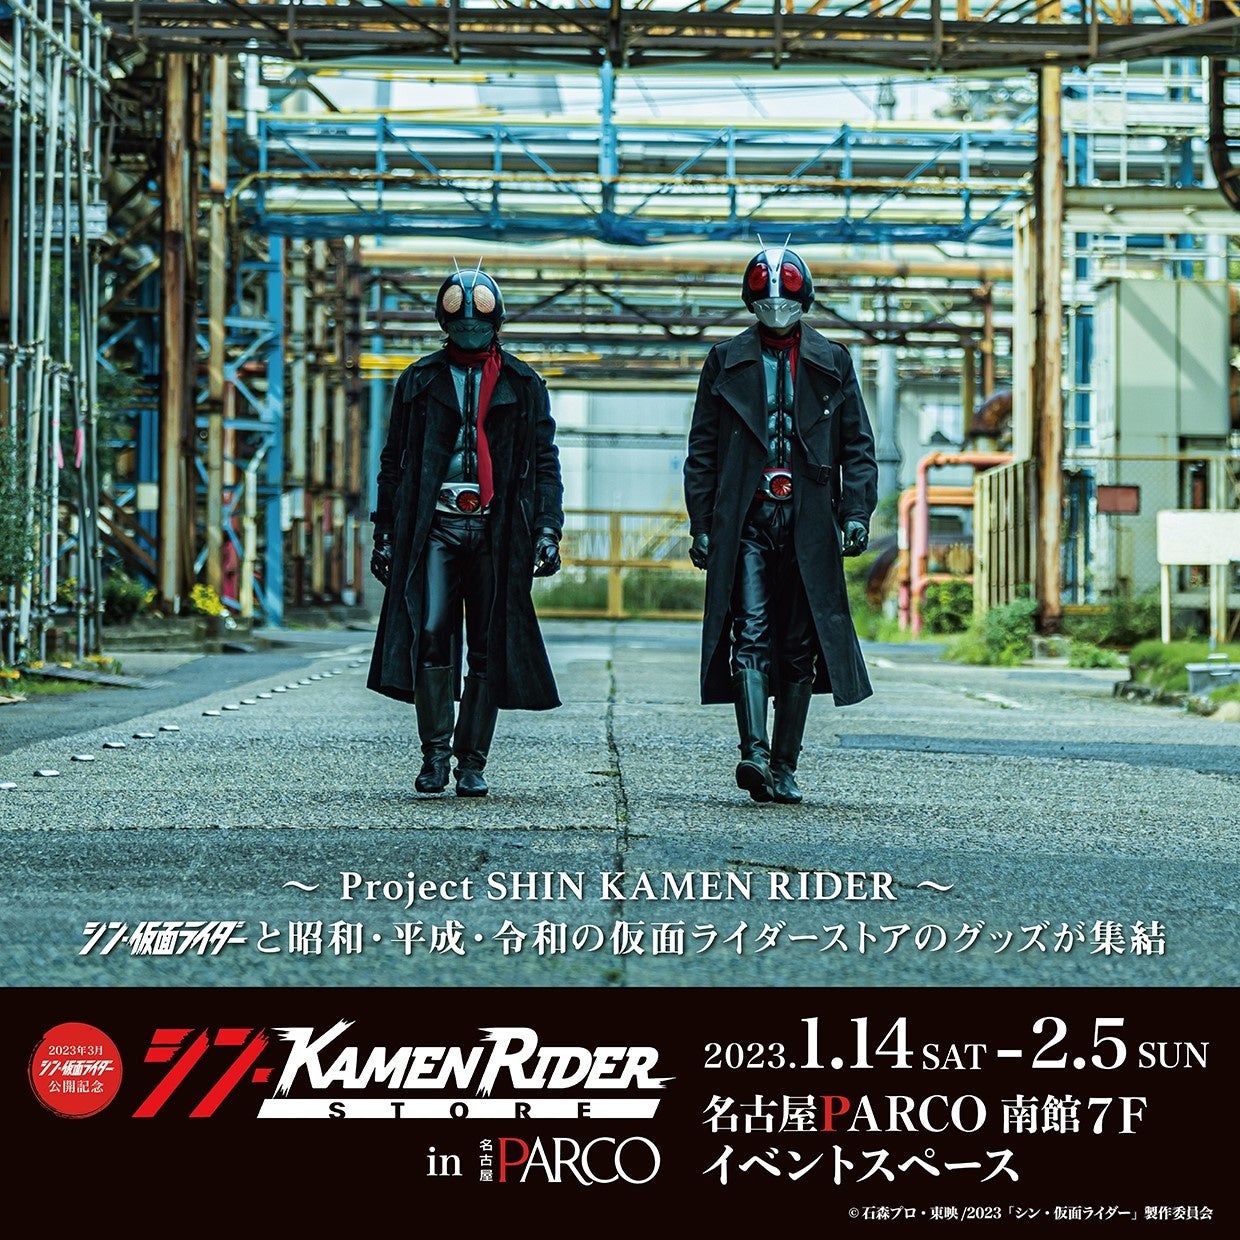 ～ Project SHIN KAMEN RIDER ～　シン・仮面ライダーストア in 名古屋PARCO　23年1月14日(土) ～ 2月5日(日) 期間限定OPEN